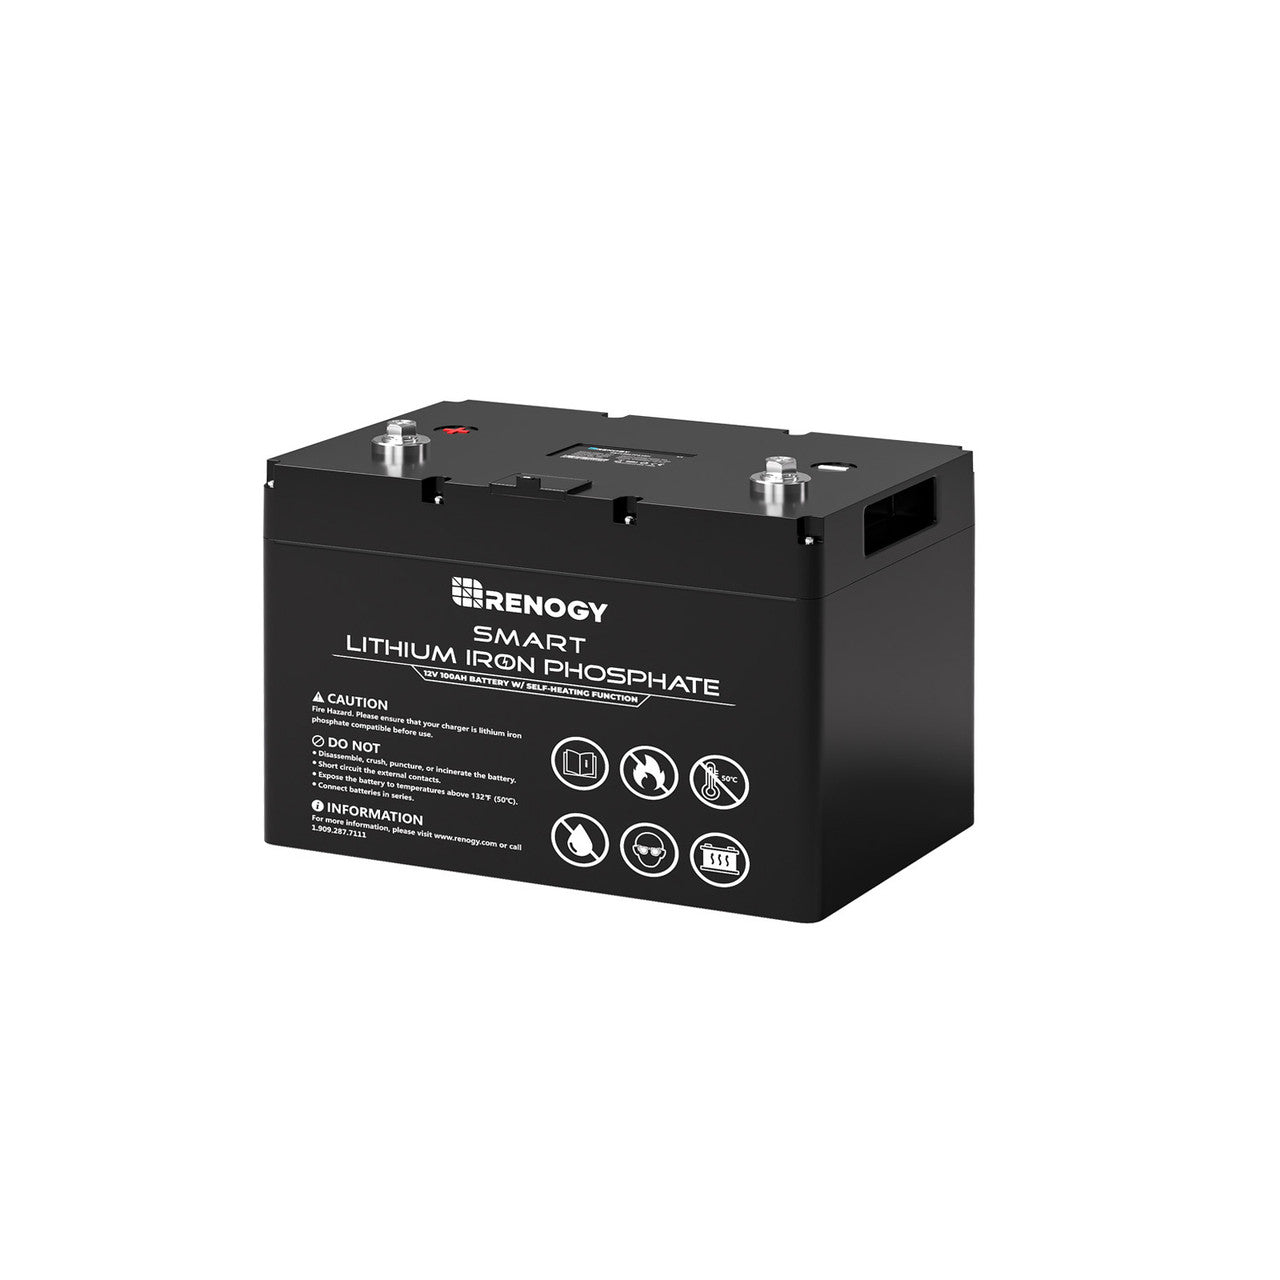 Renogy 12V 100Ah Smart Lithium Iron Phosphate Battery w/ Self-Heating Function - Solar Generators and Power Stations Plus